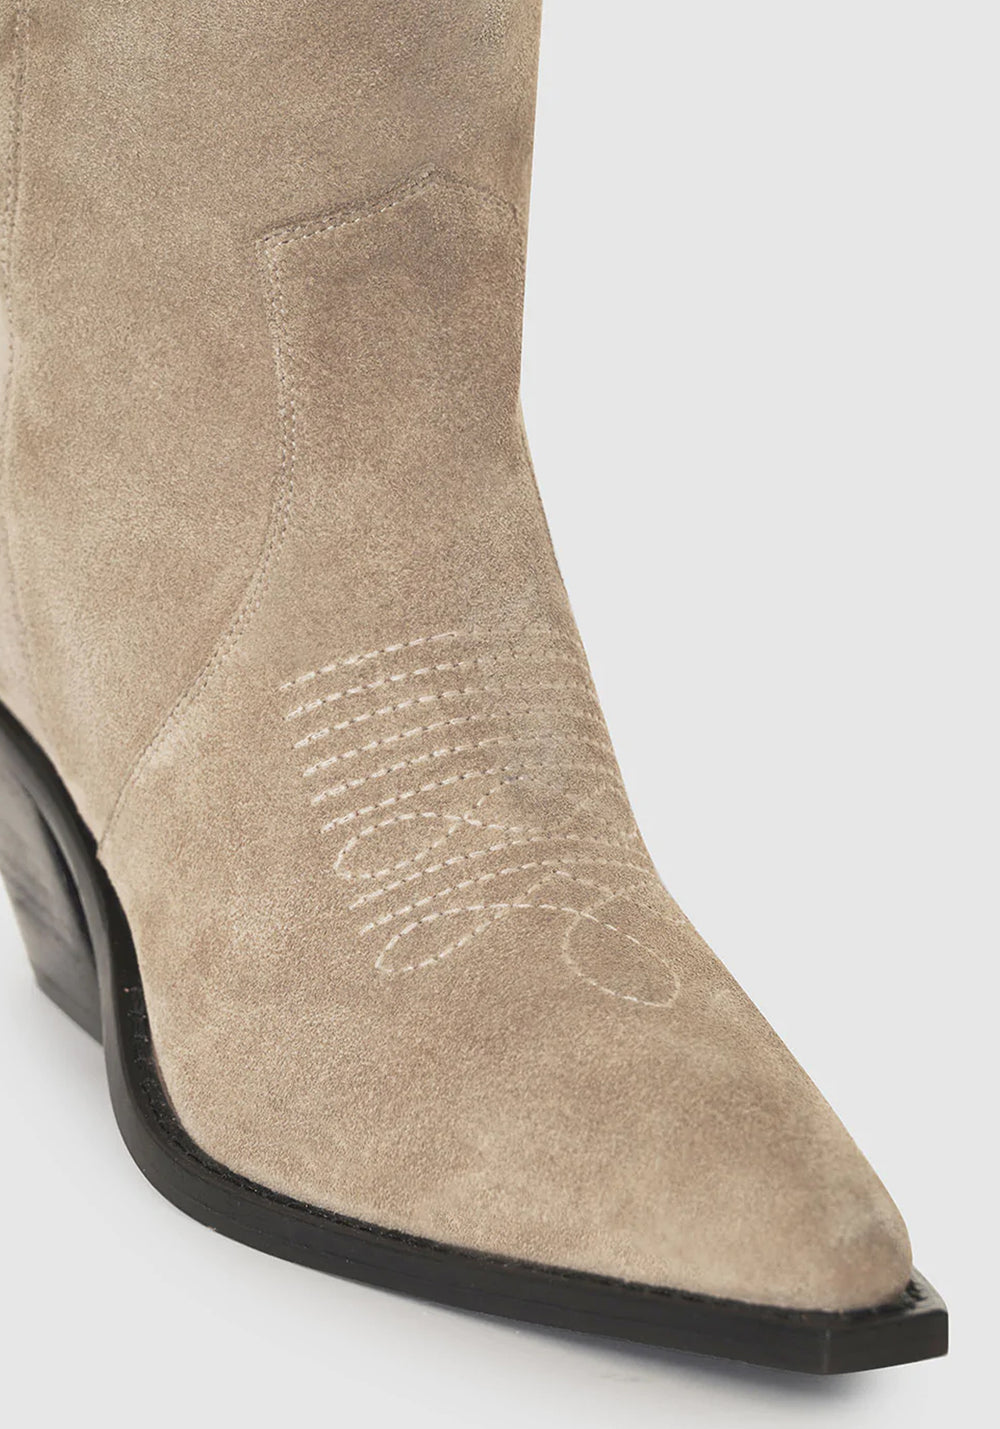 TALL TANIA BOOTS ASH GREY SUEDE